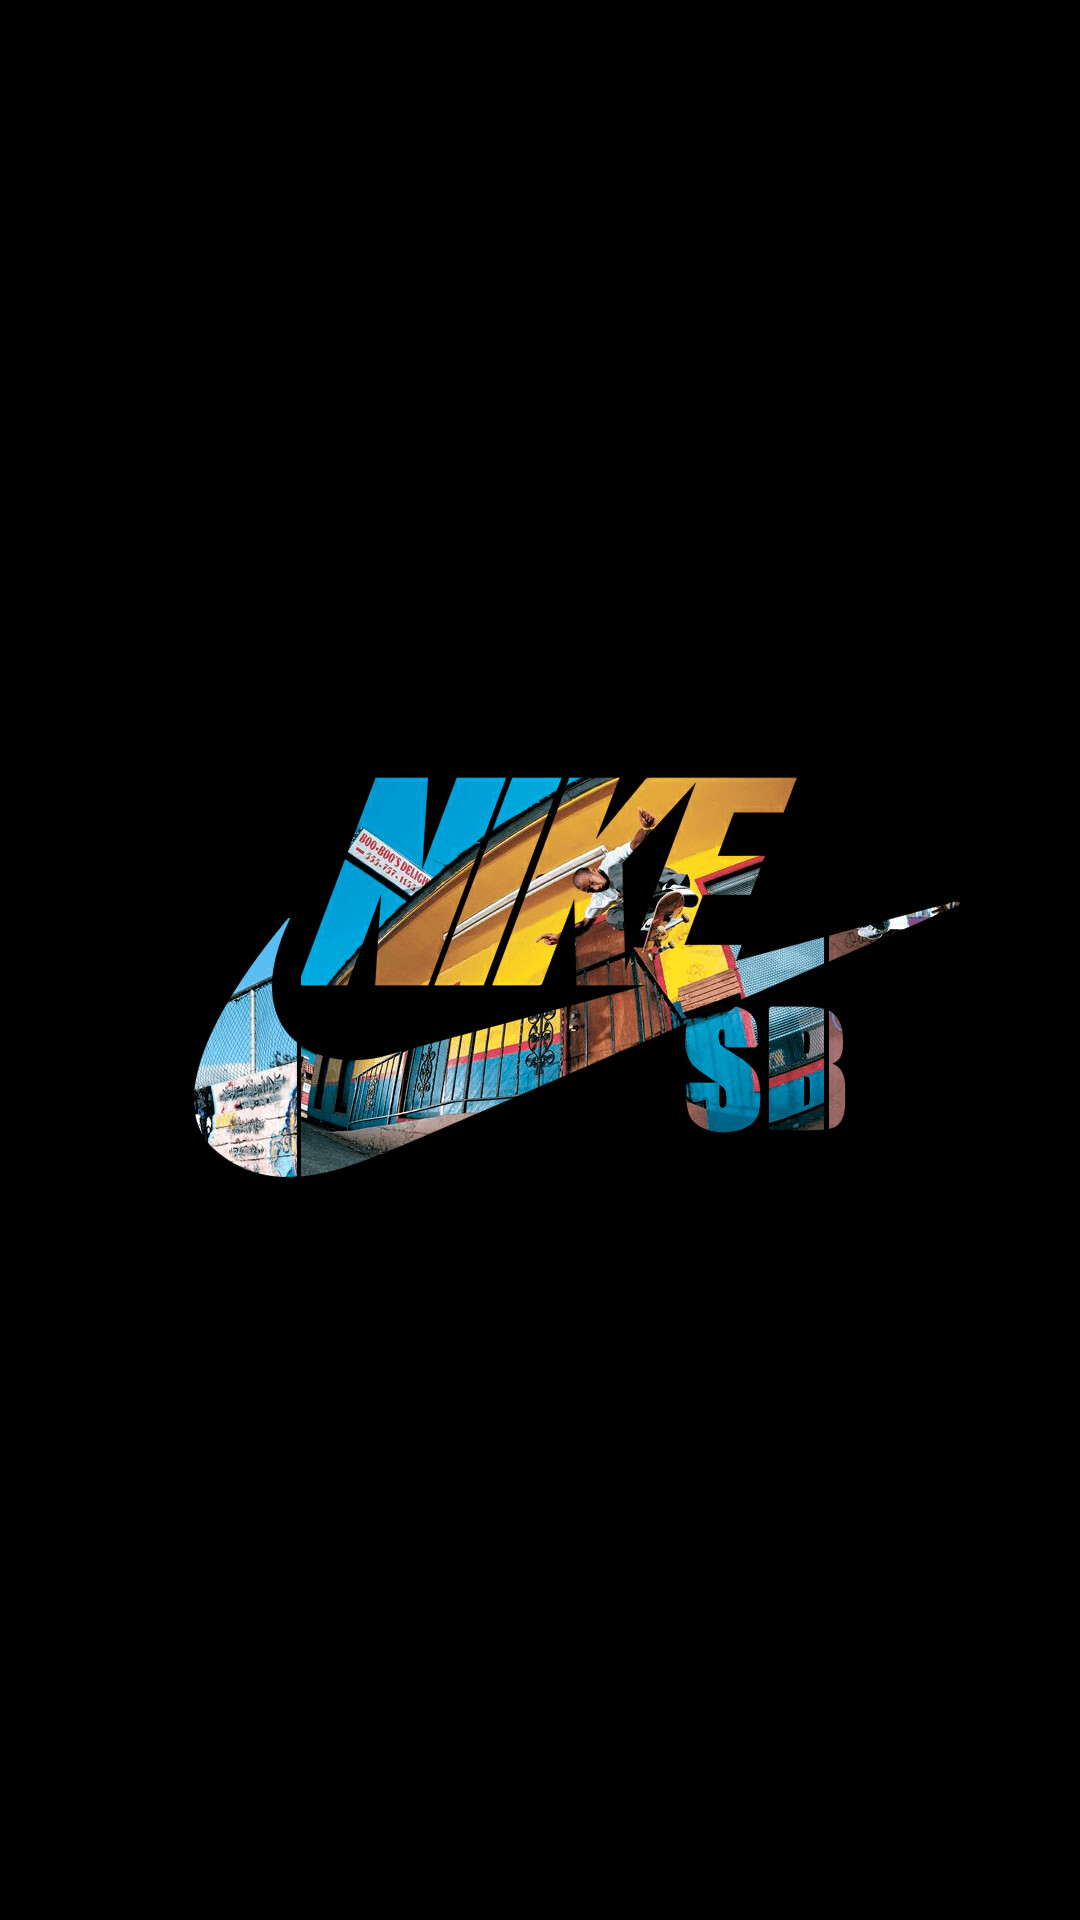 Nike: American company, established in 1968, named after the Greek goddess of victory. 1080x1920 Full HD Wallpaper.